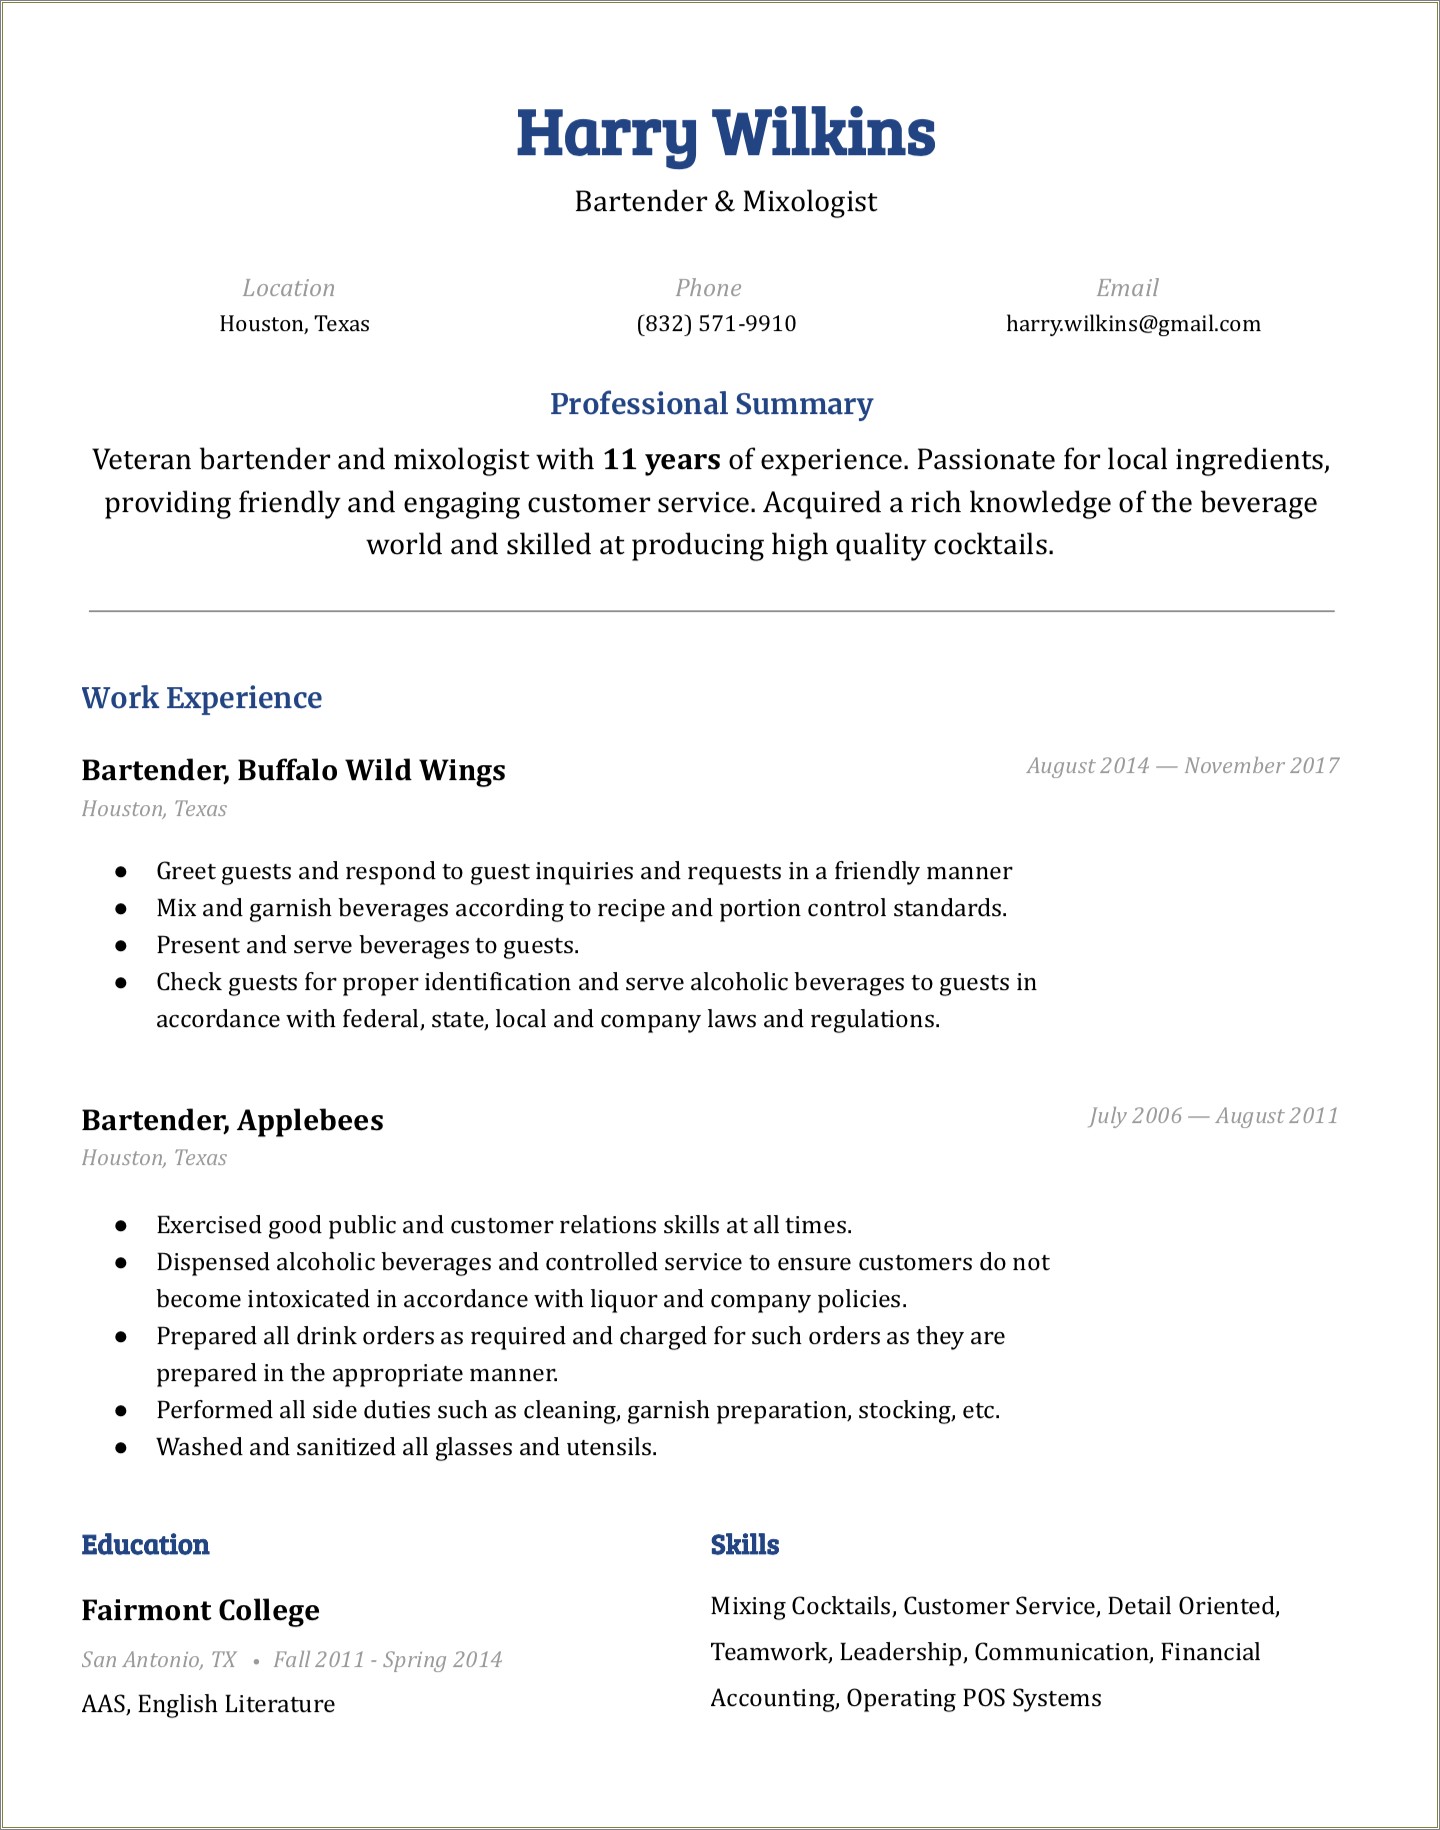 Basic Resume Template Download For Free